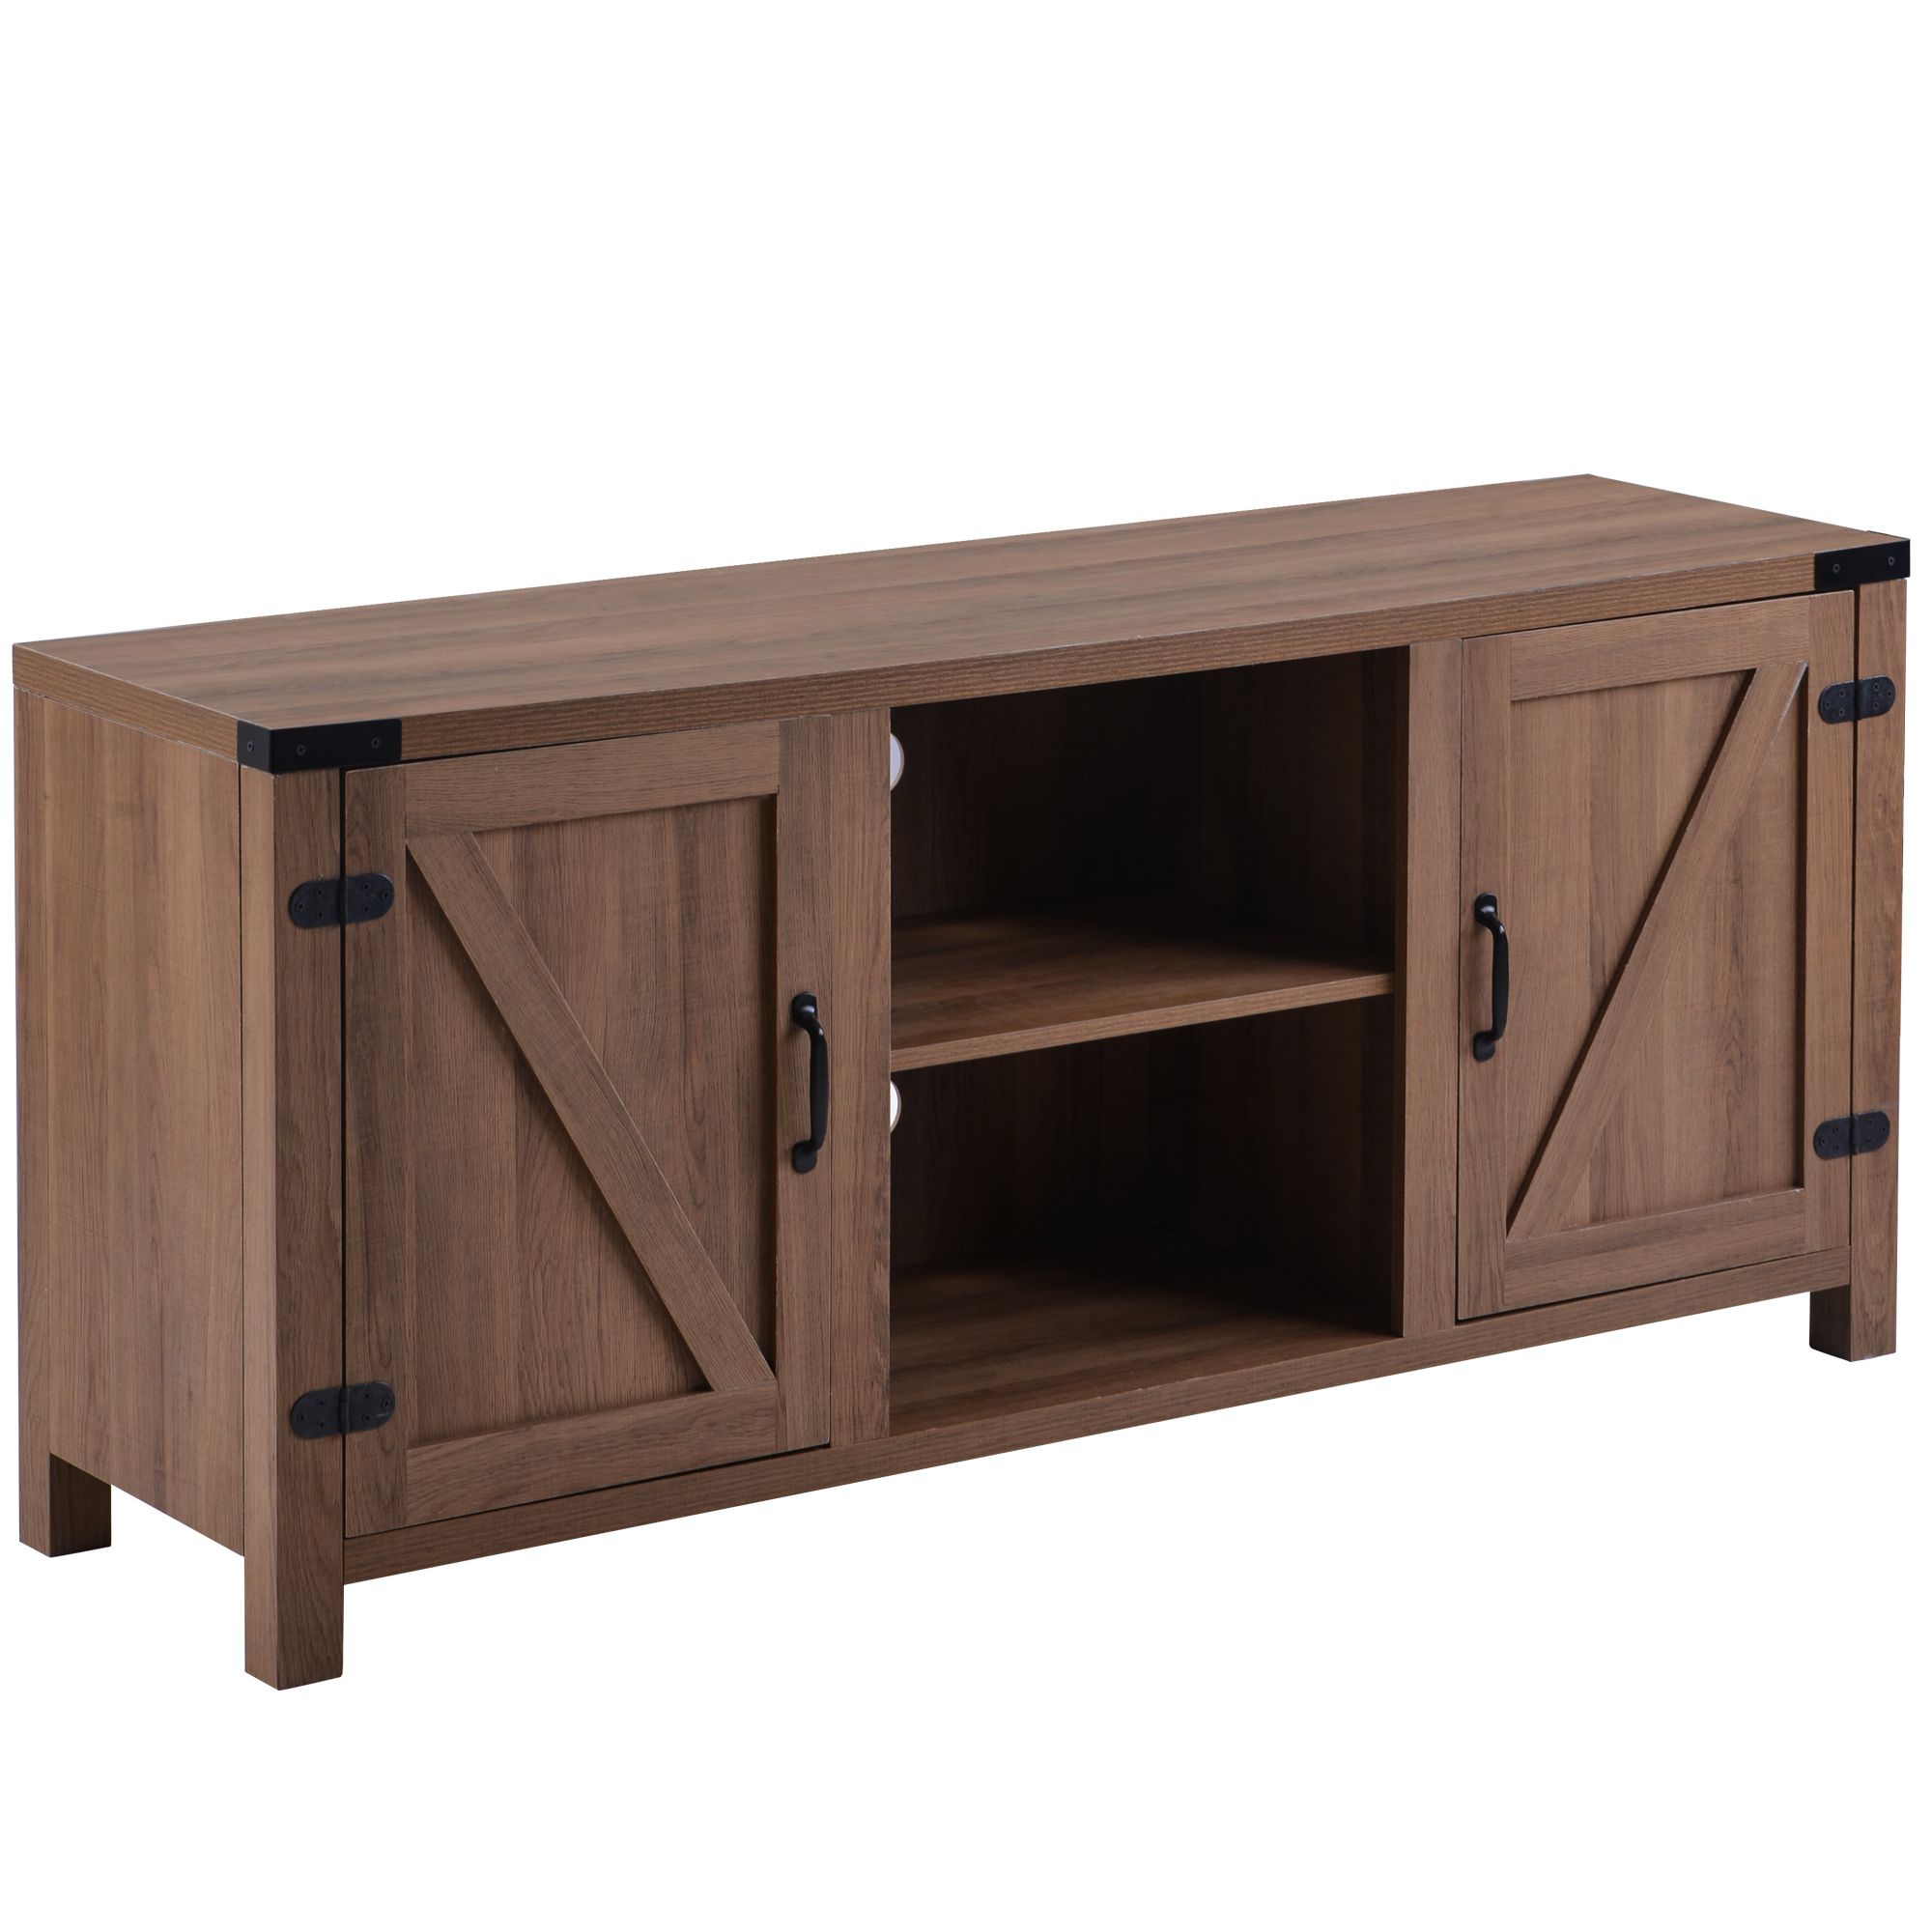 Clearance! Segmart Traditional Wood Tv Stands Console With With Modern Wood Tv Stands (View 13 of 15)